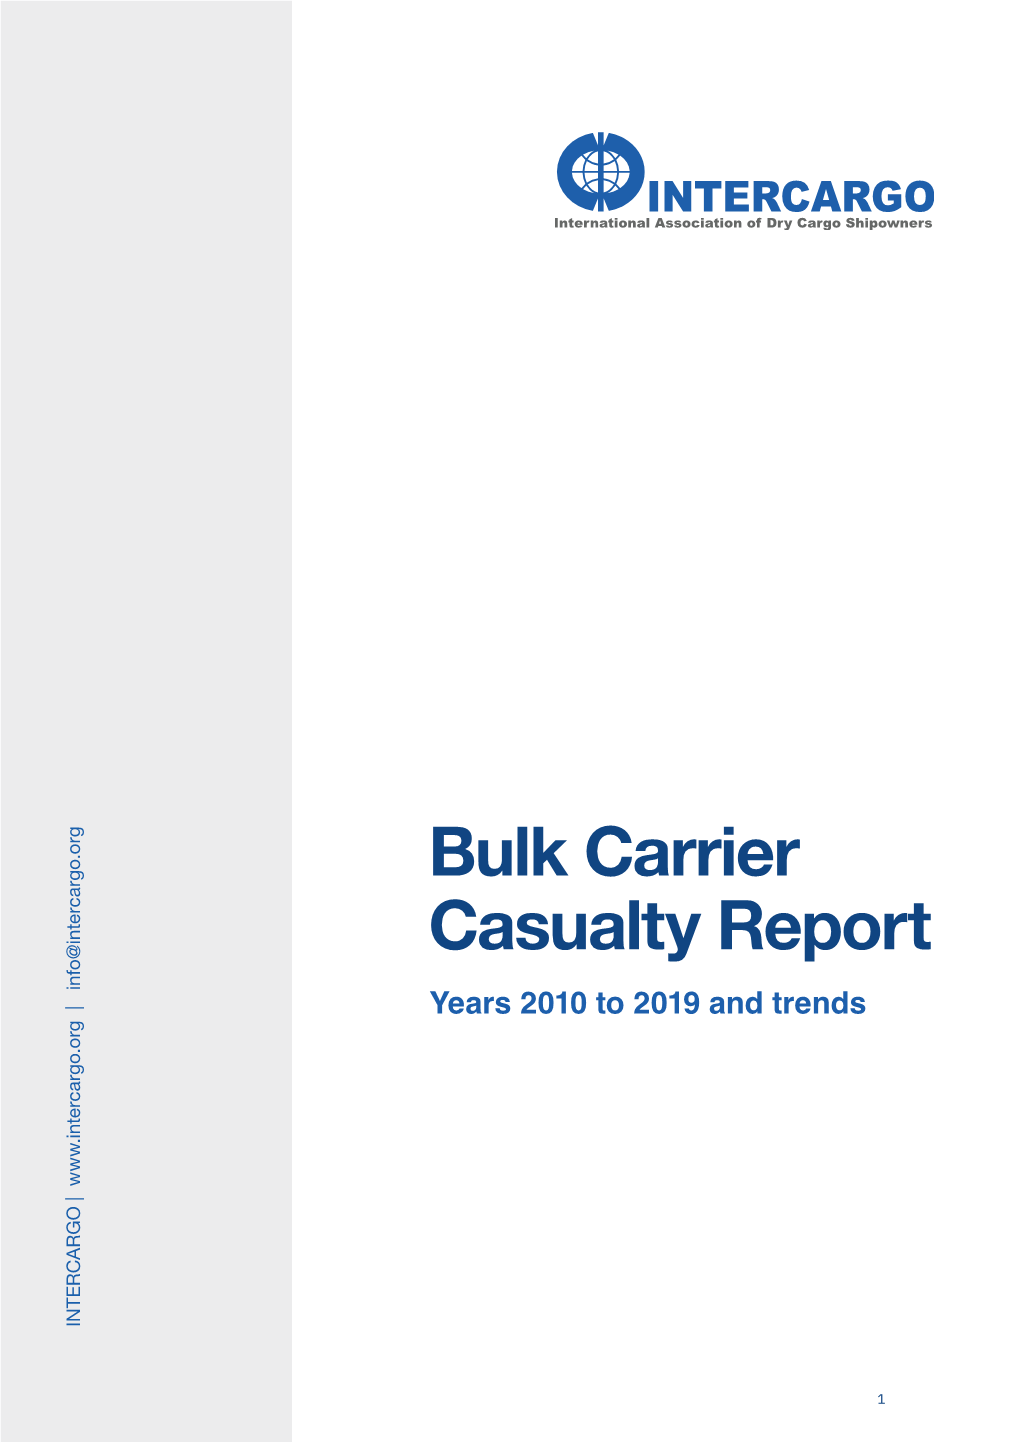 Bulk Carrier Casualty Report Years 2010 to 2019 and Trends INTERCARGO | | Info@Intercargo.Org | INTERCARGO